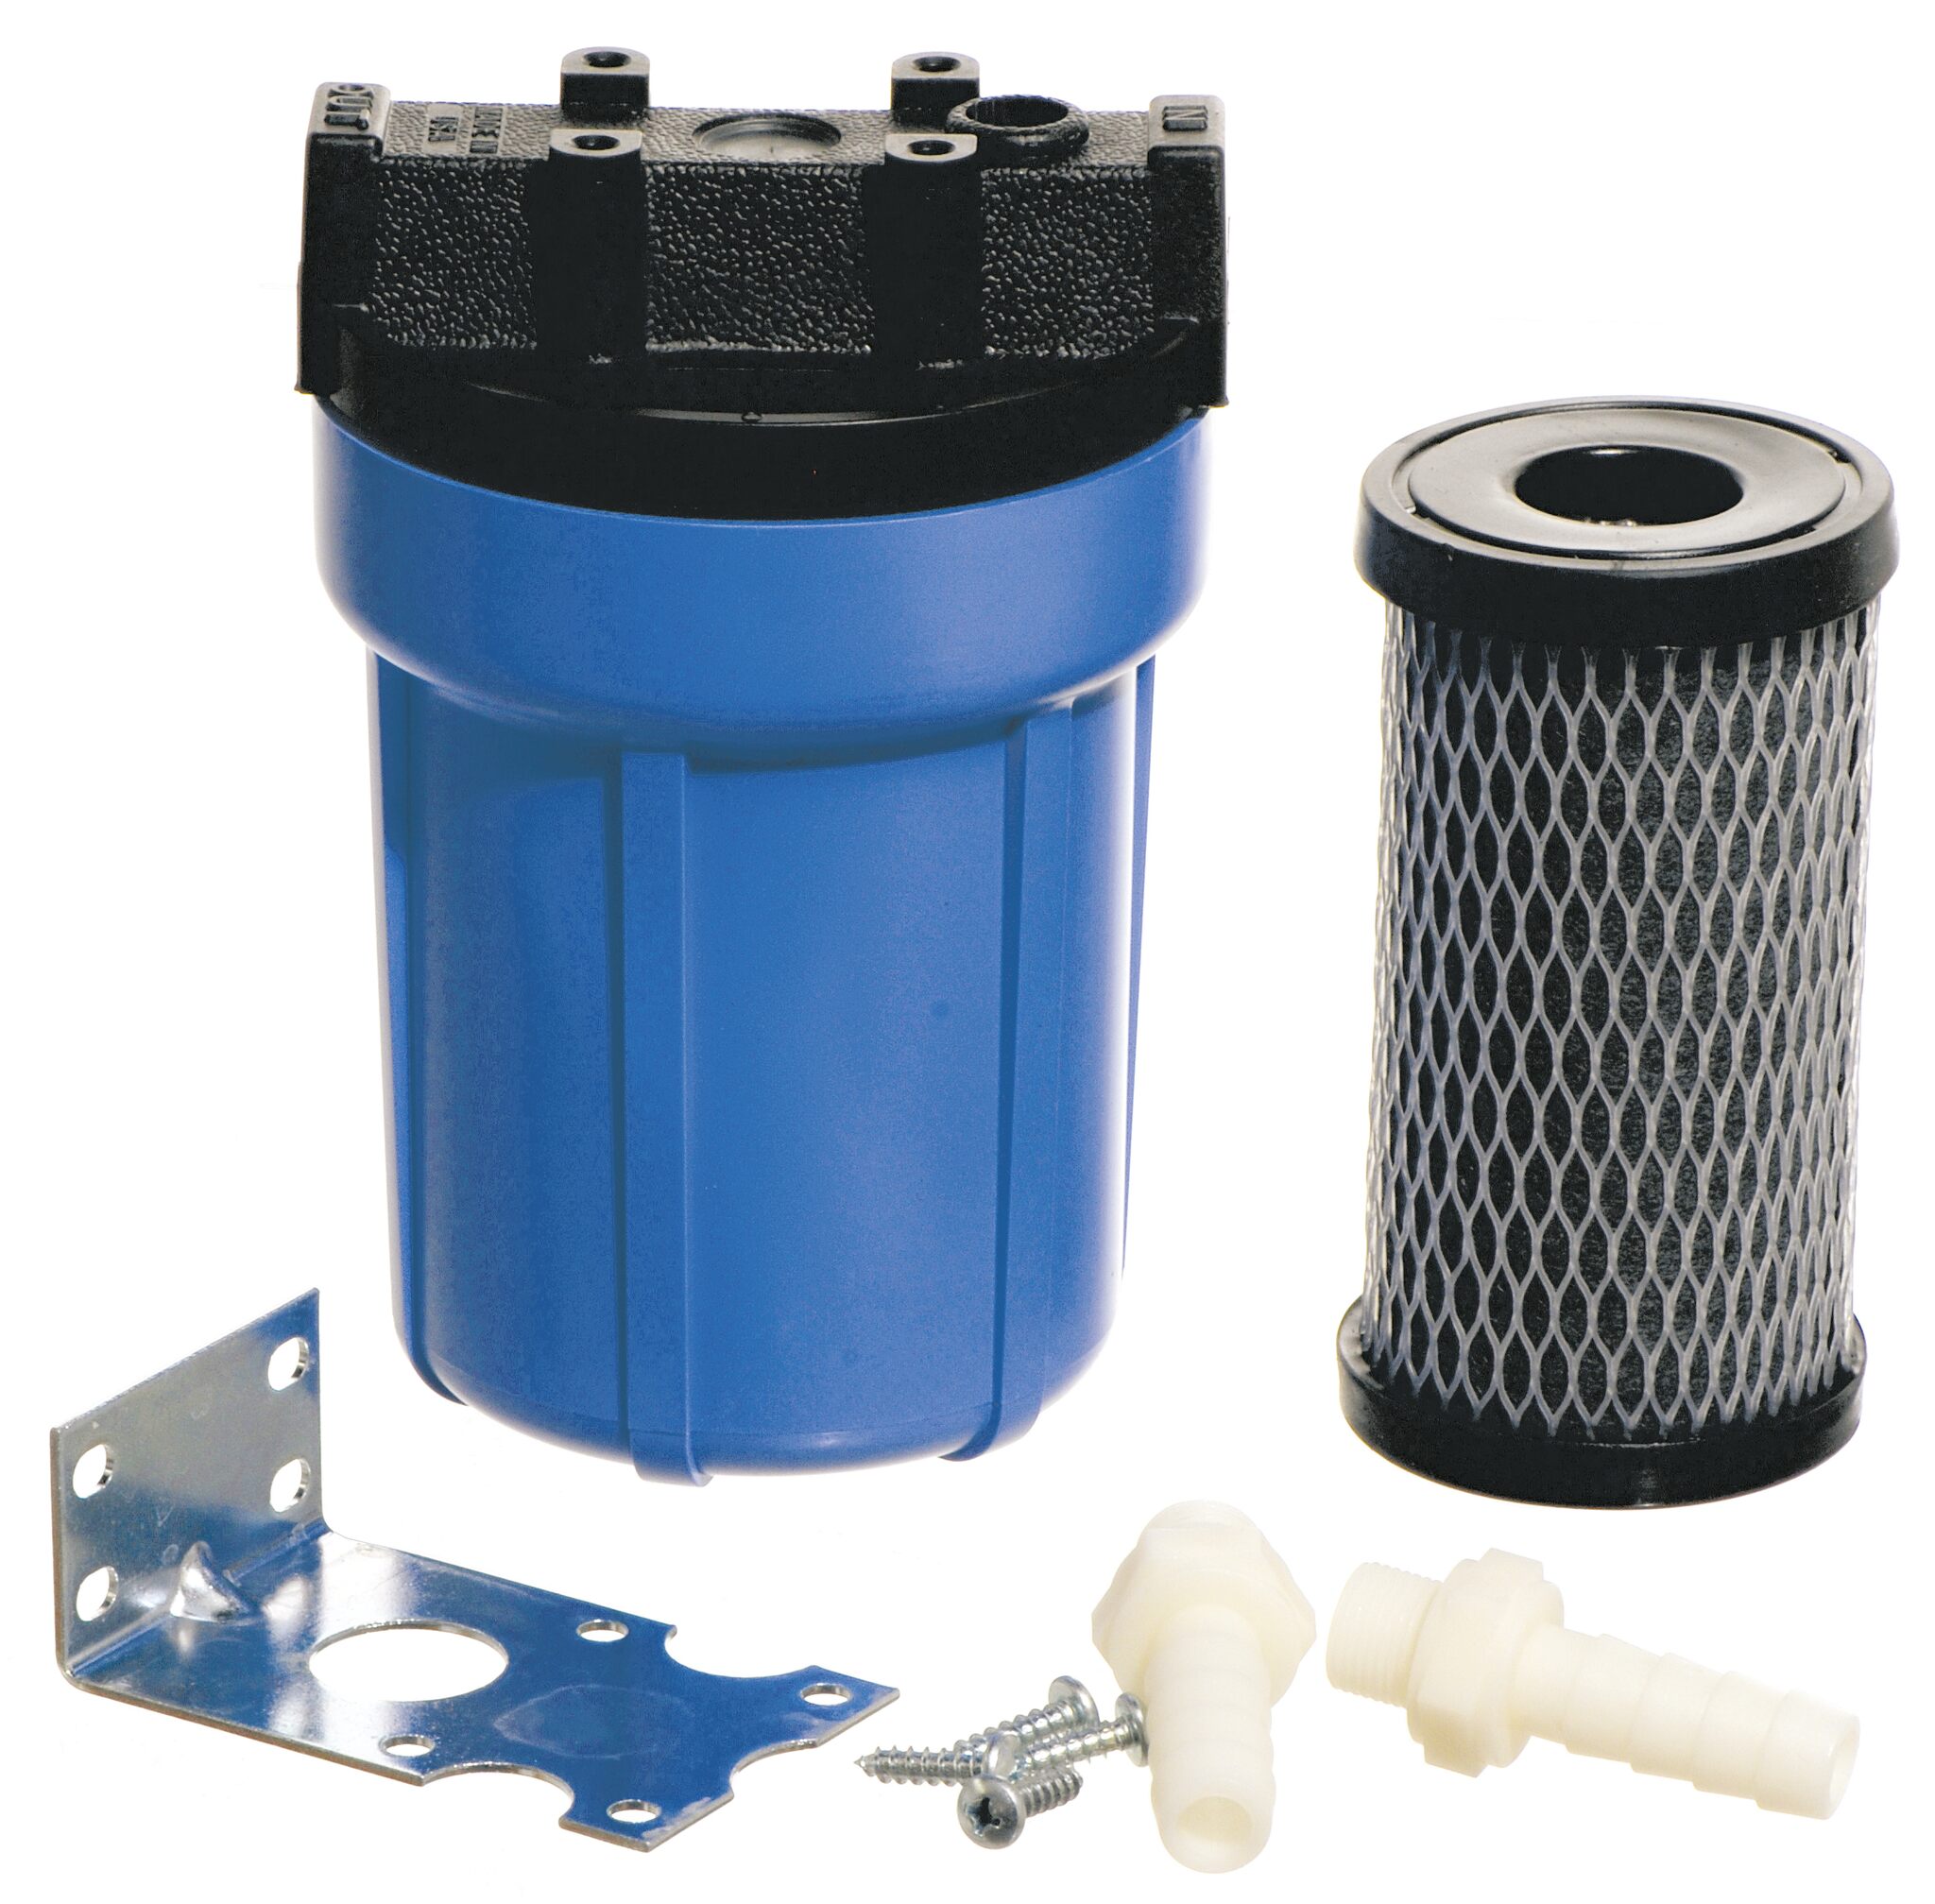 Yachticon water filter set